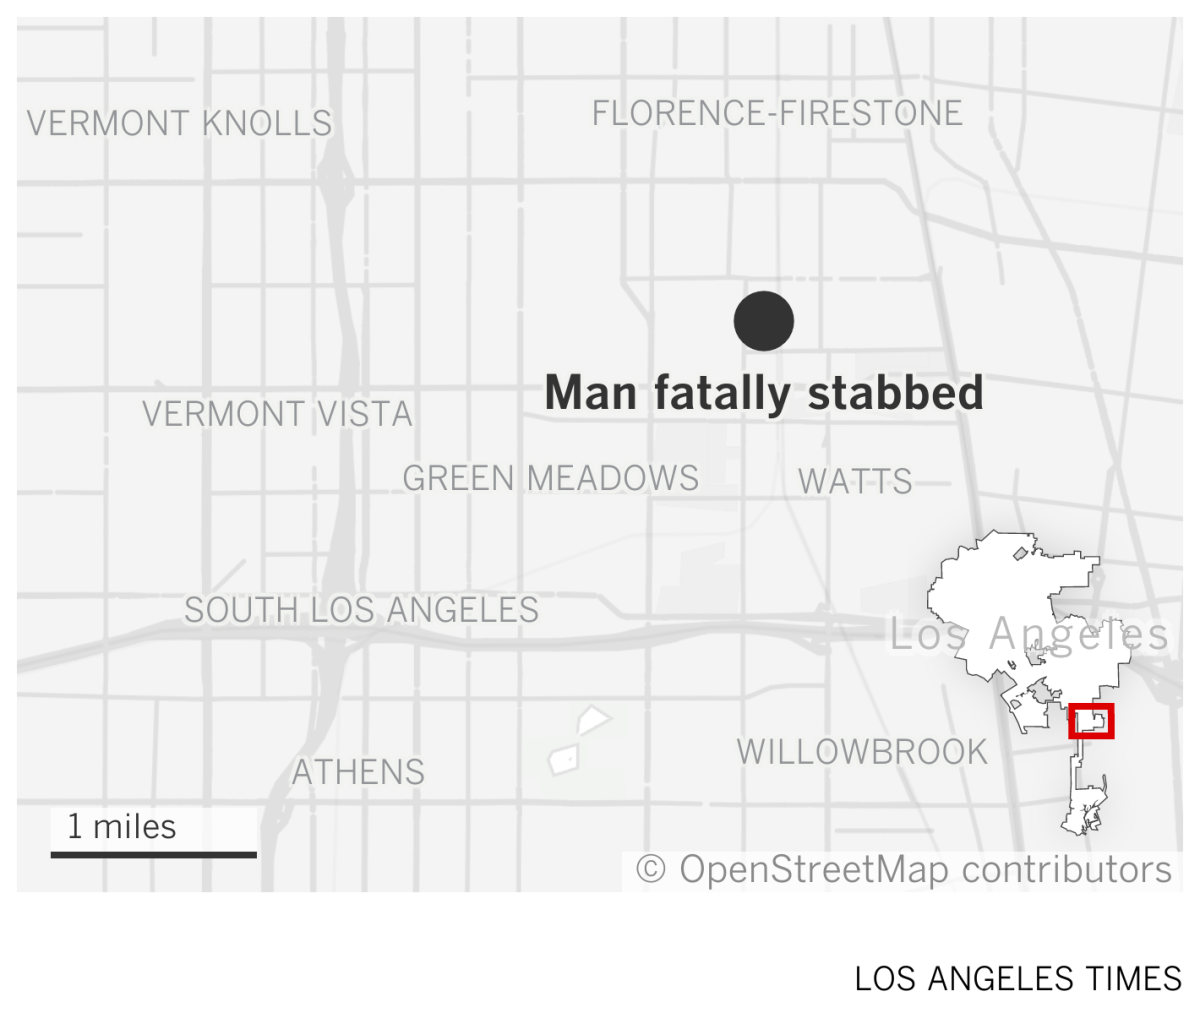 A map showing the location of the man fatally stabbed at the 13500 block of Maie Avenue, Los Angeles. 